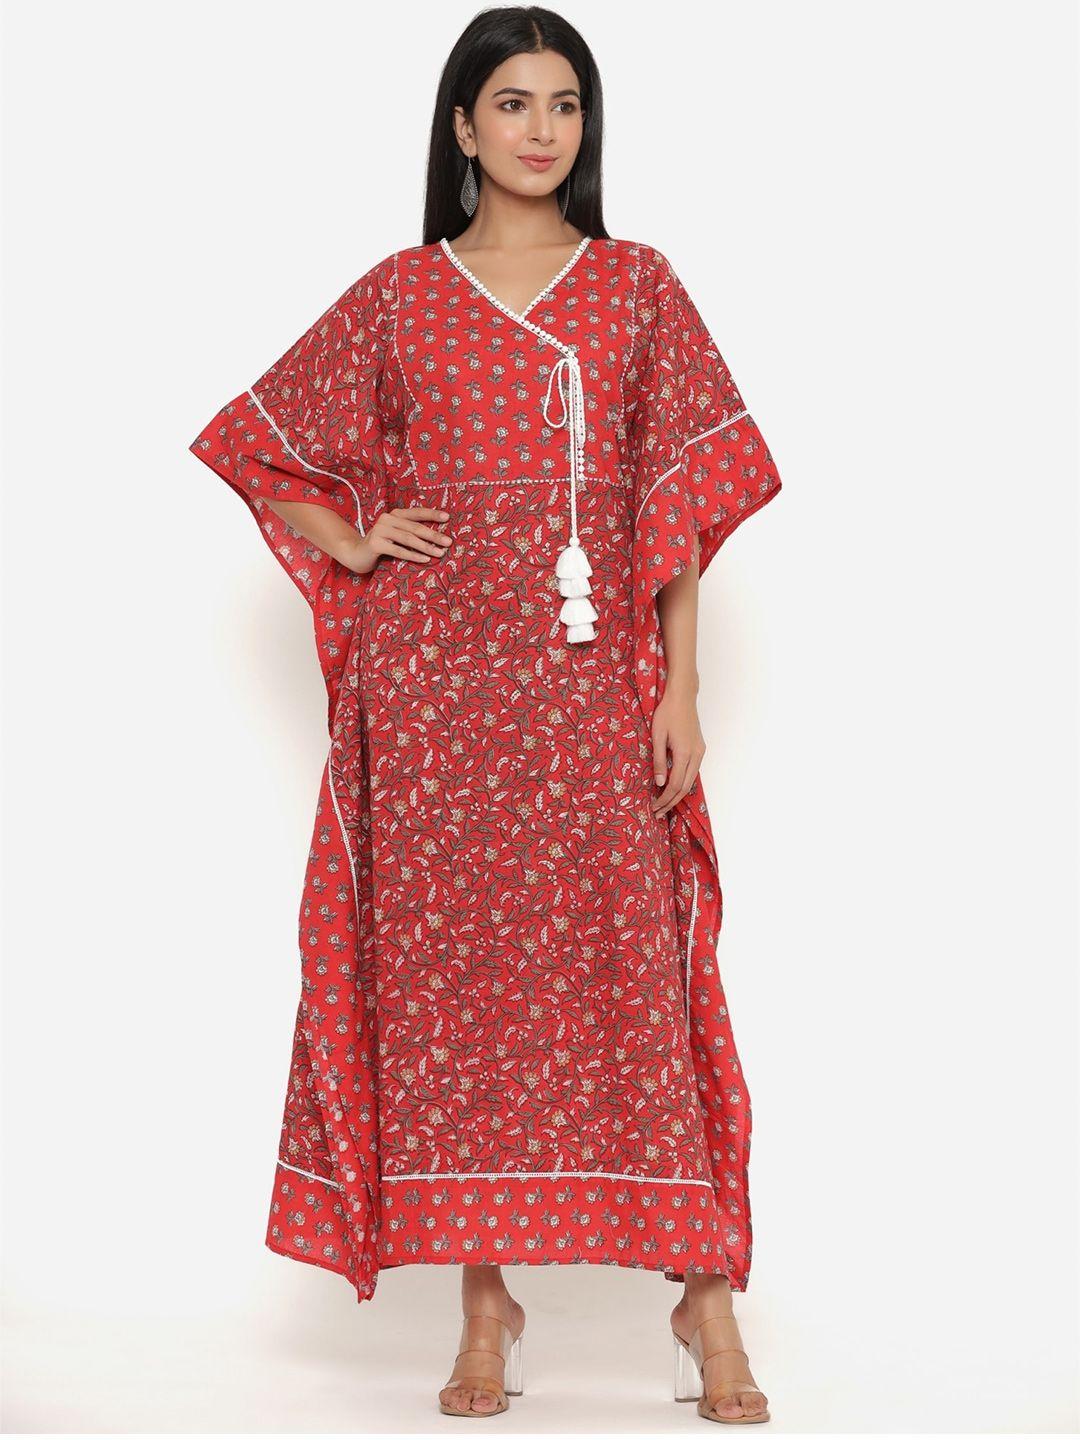 mirari red and white floral printed pure cotton kaftan maxi nightdress